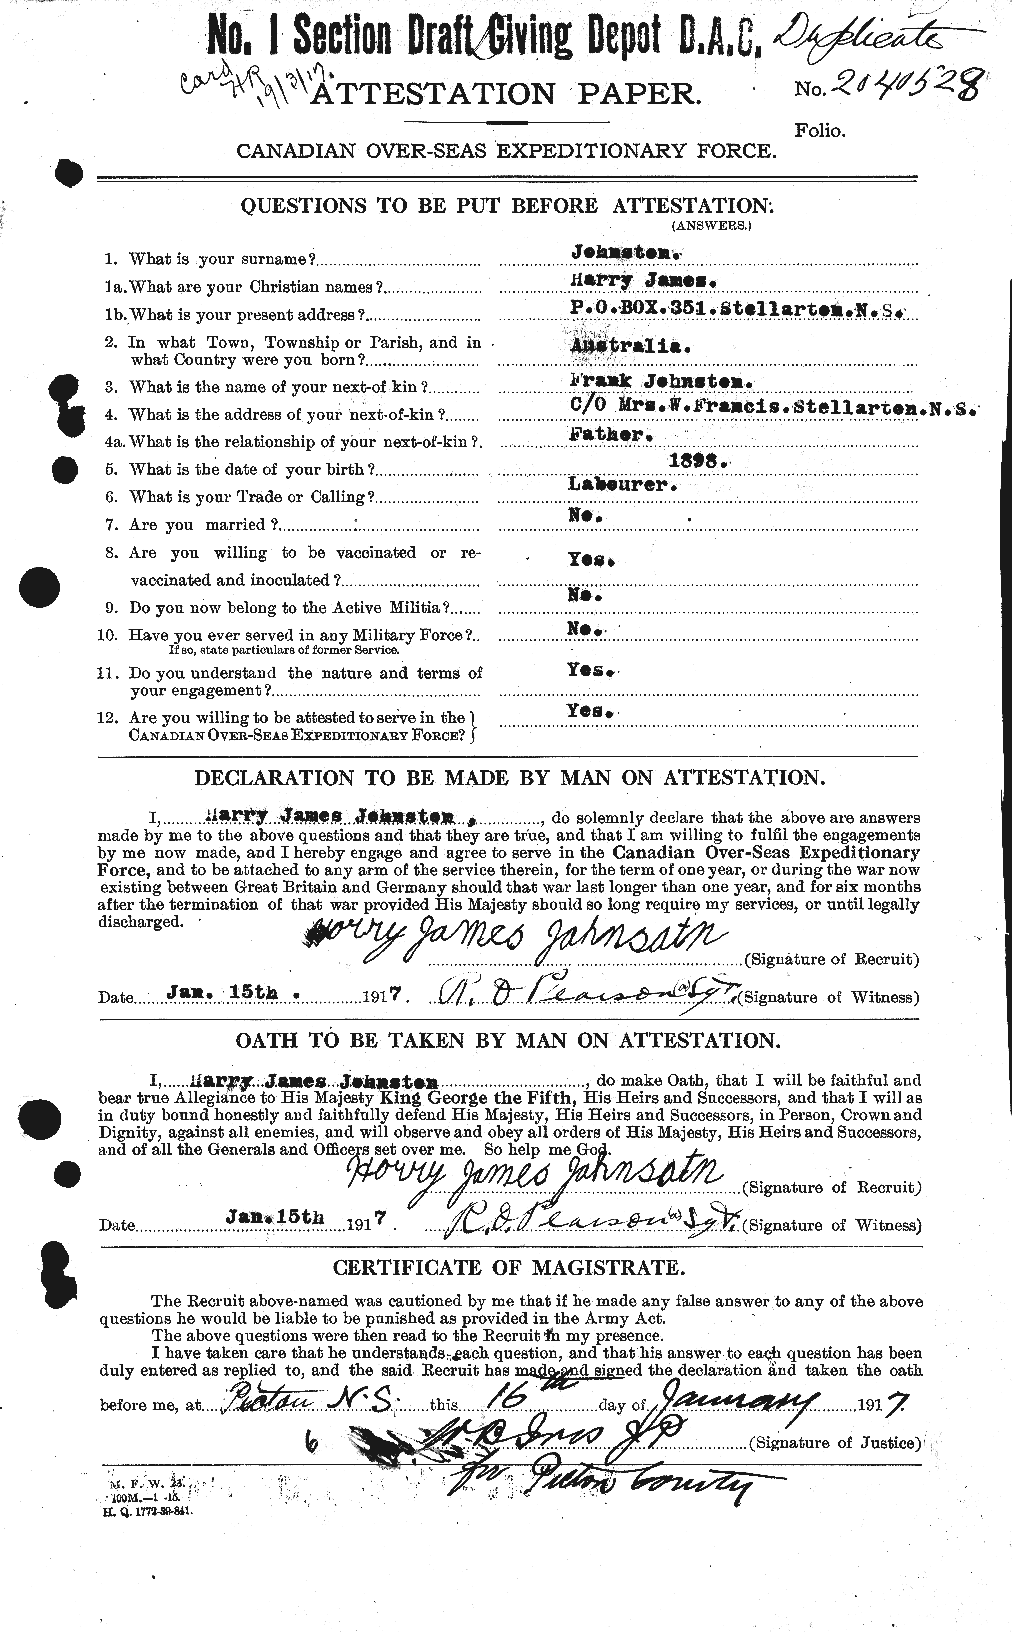 Personnel Records of the First World War - CEF 419519a